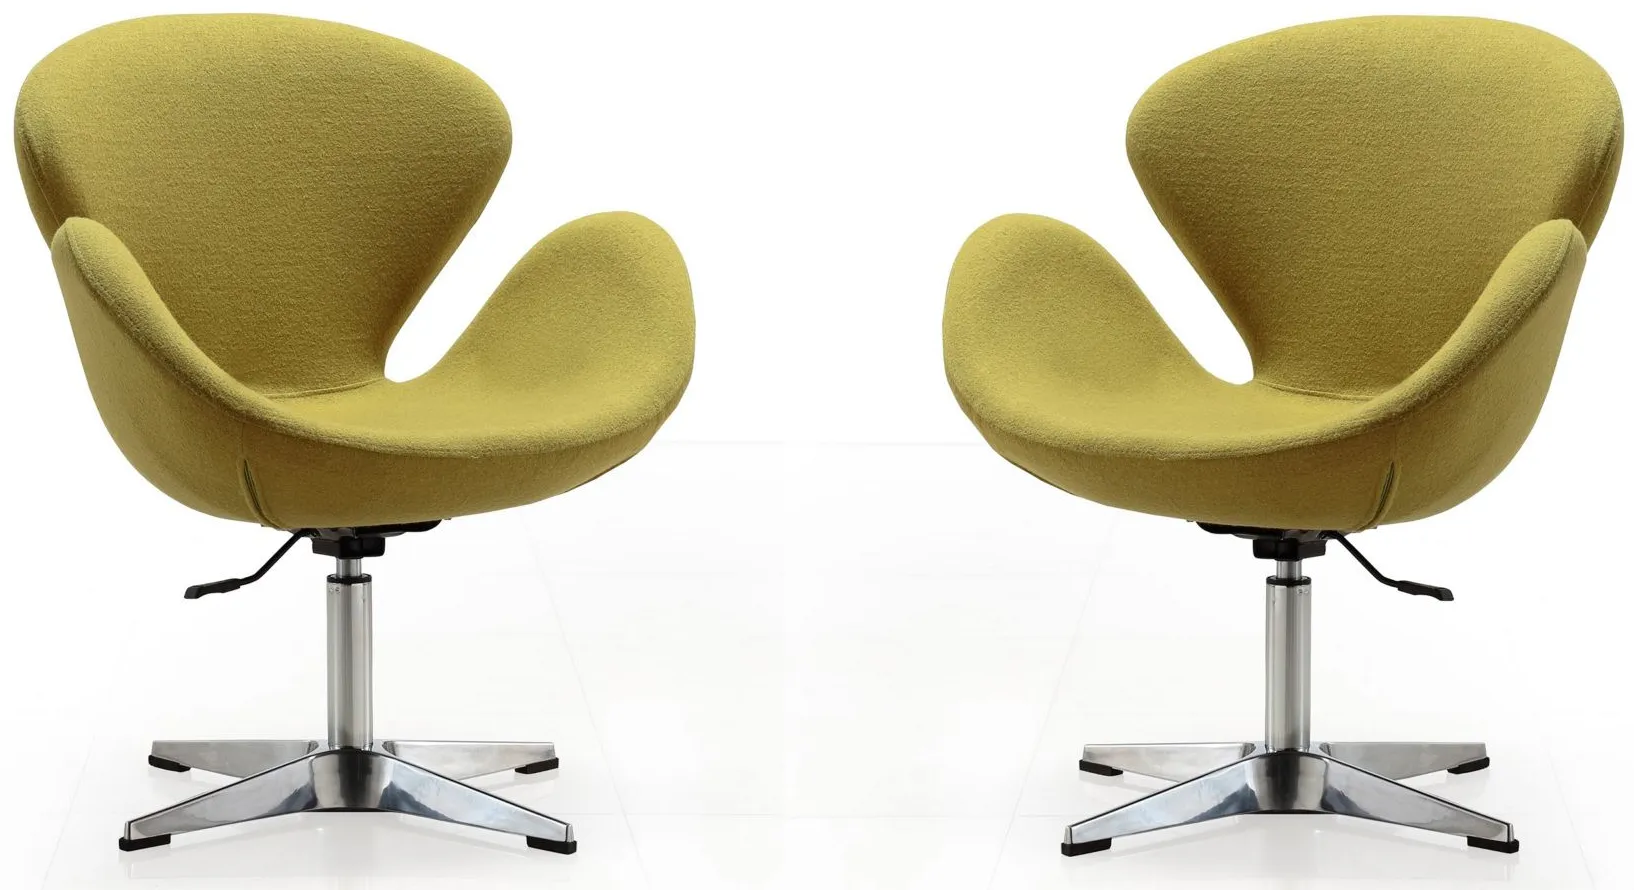 Raspberry Adjustable Swivel Chair (Set of 2) in Green and Polished Chrome by Manhattan Comfort